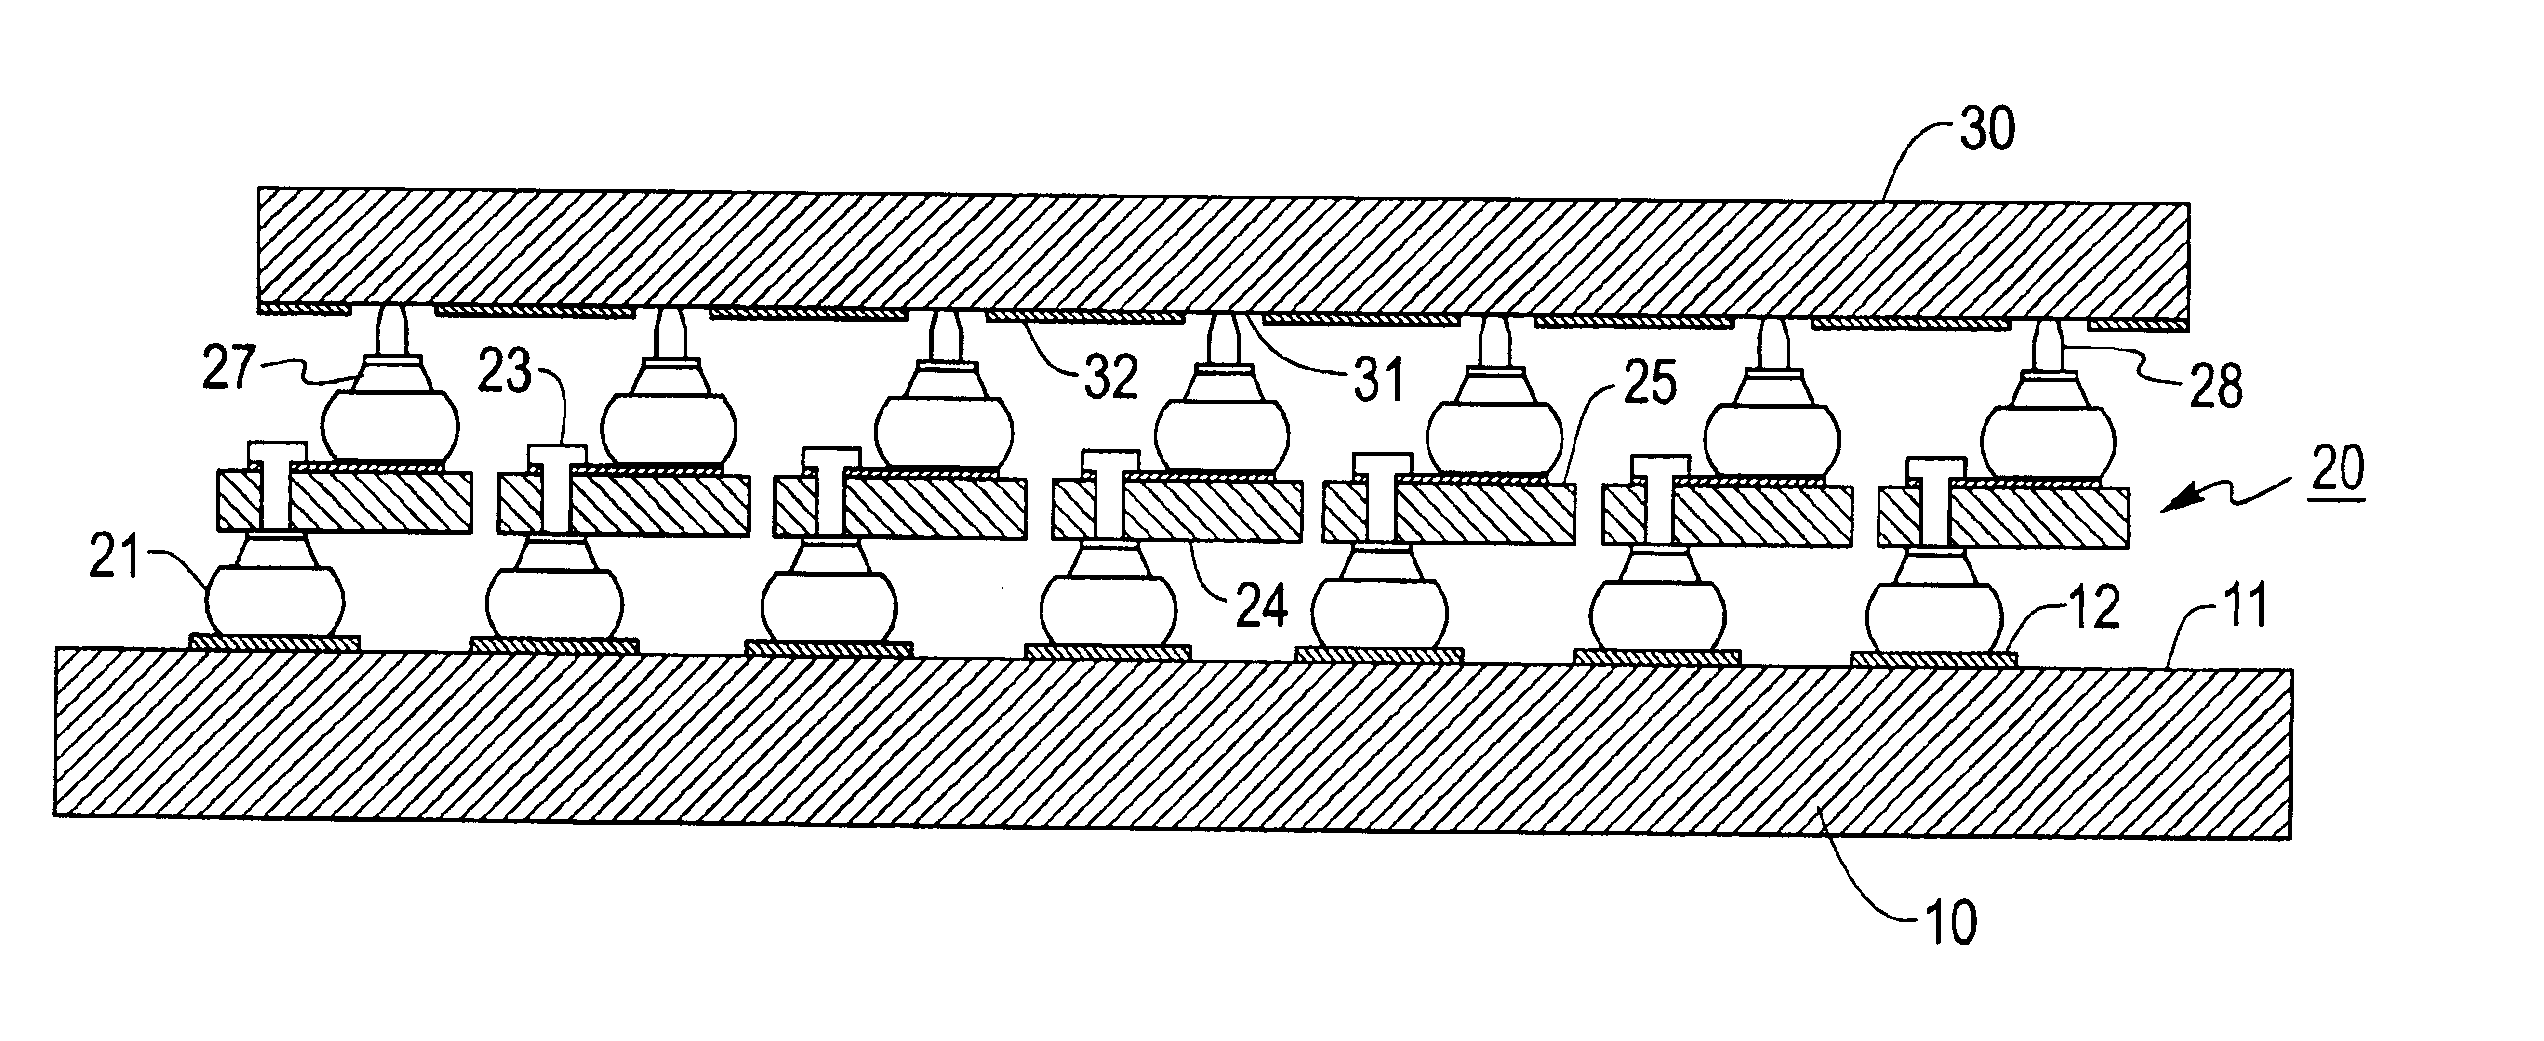 Method for fabricating a structure for making contact with an IC device